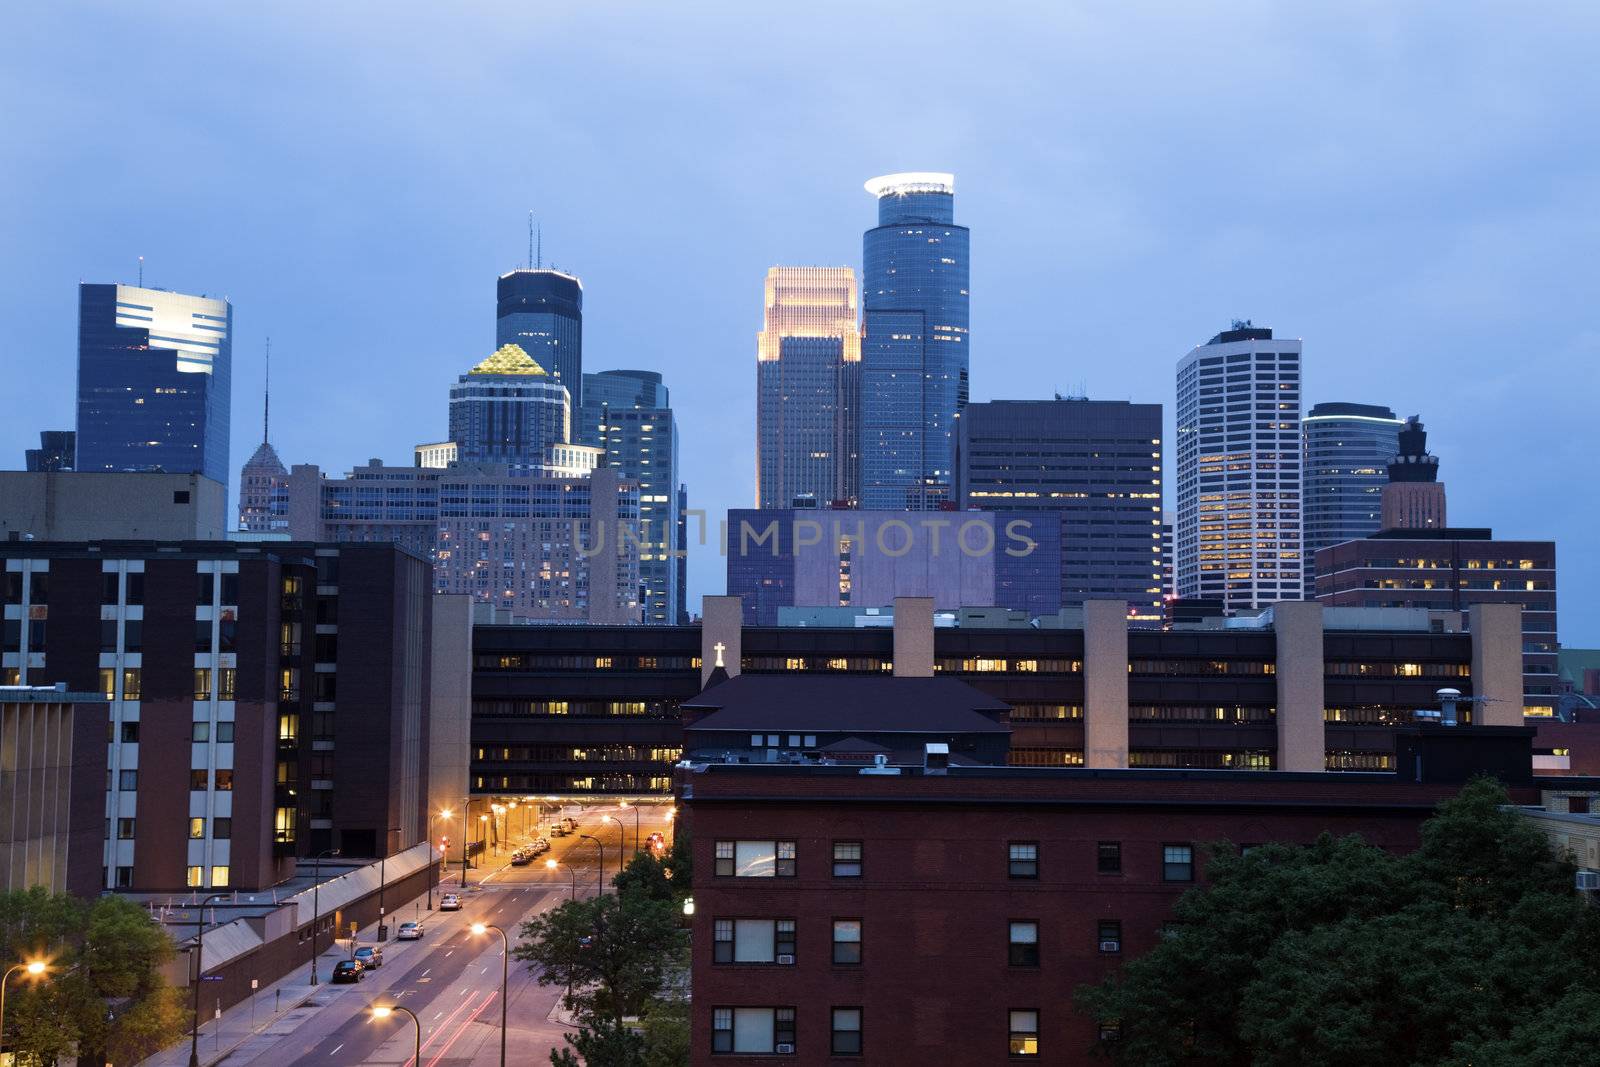 Blue evening in Minneapolis by benkrut